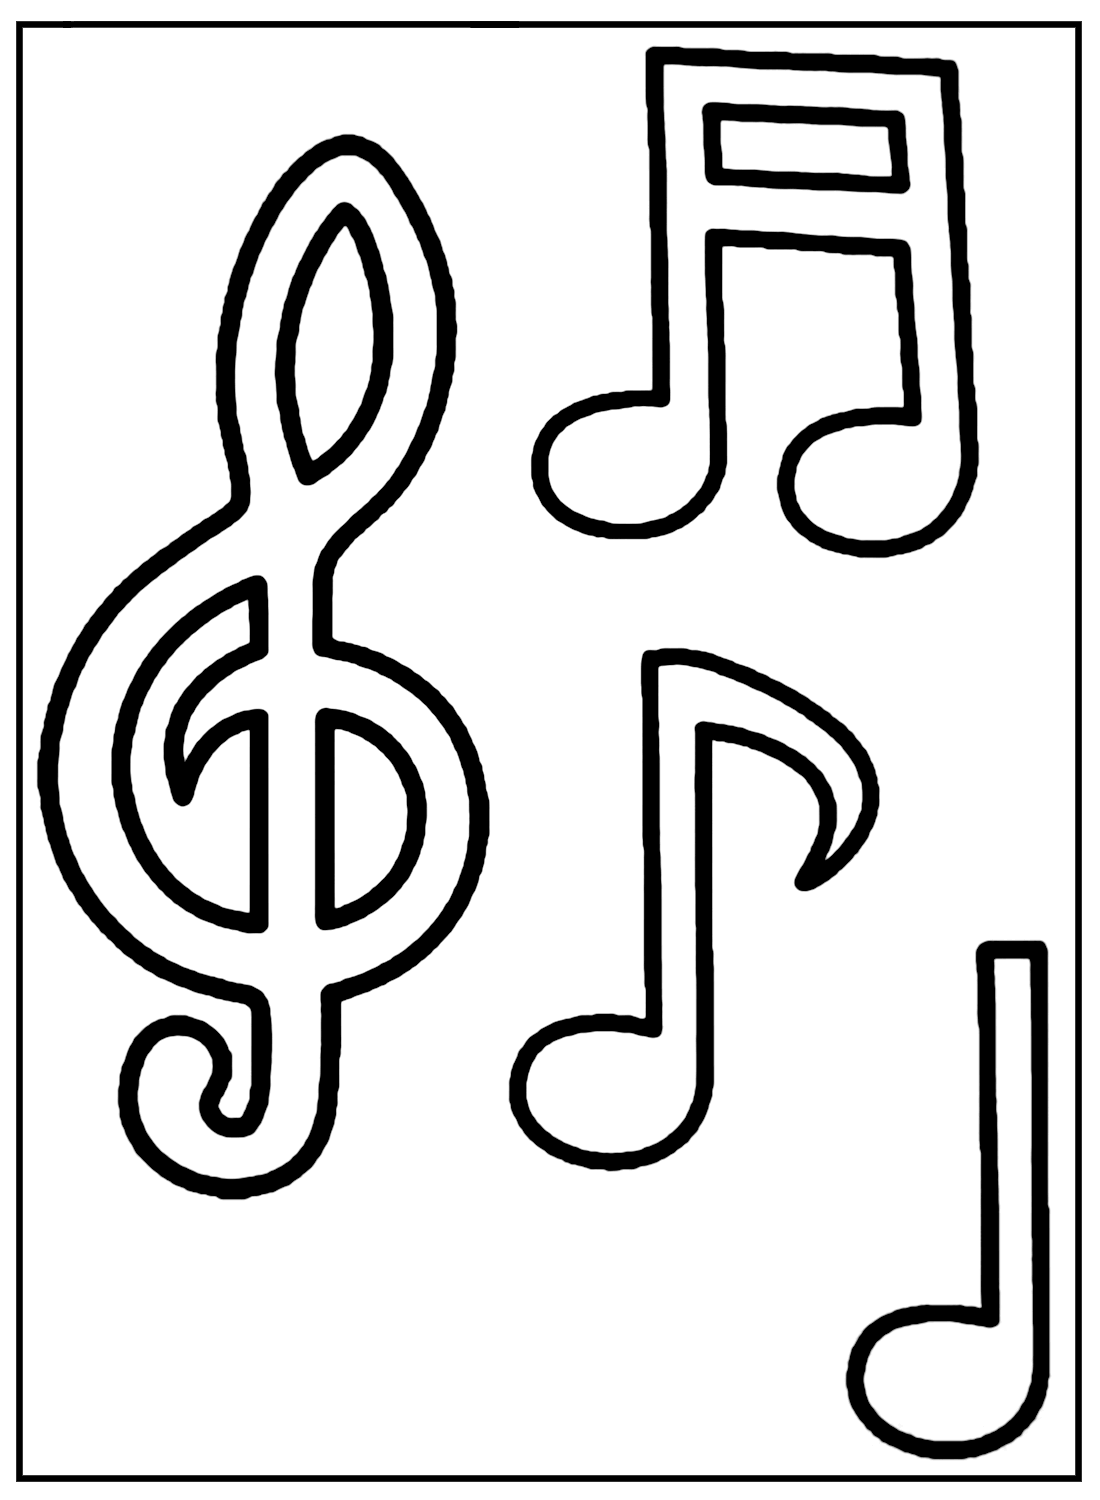 Music notes tattoo coloring page